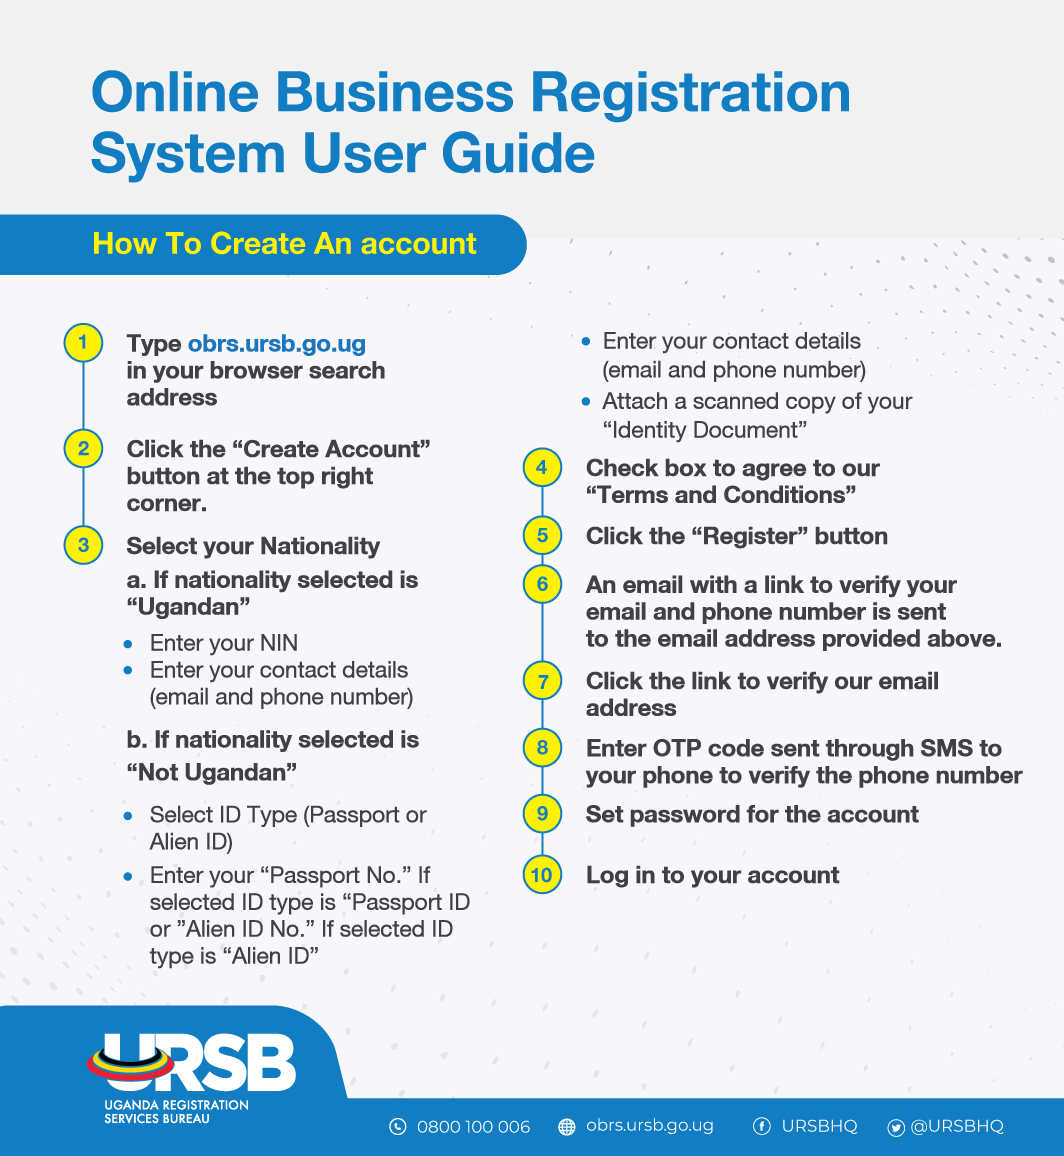 Need to create an account? Follow our OBRS User Guide. Type obrs.ursb.go.ug/search into your browser and get started. #BusinessRegistrationUG.